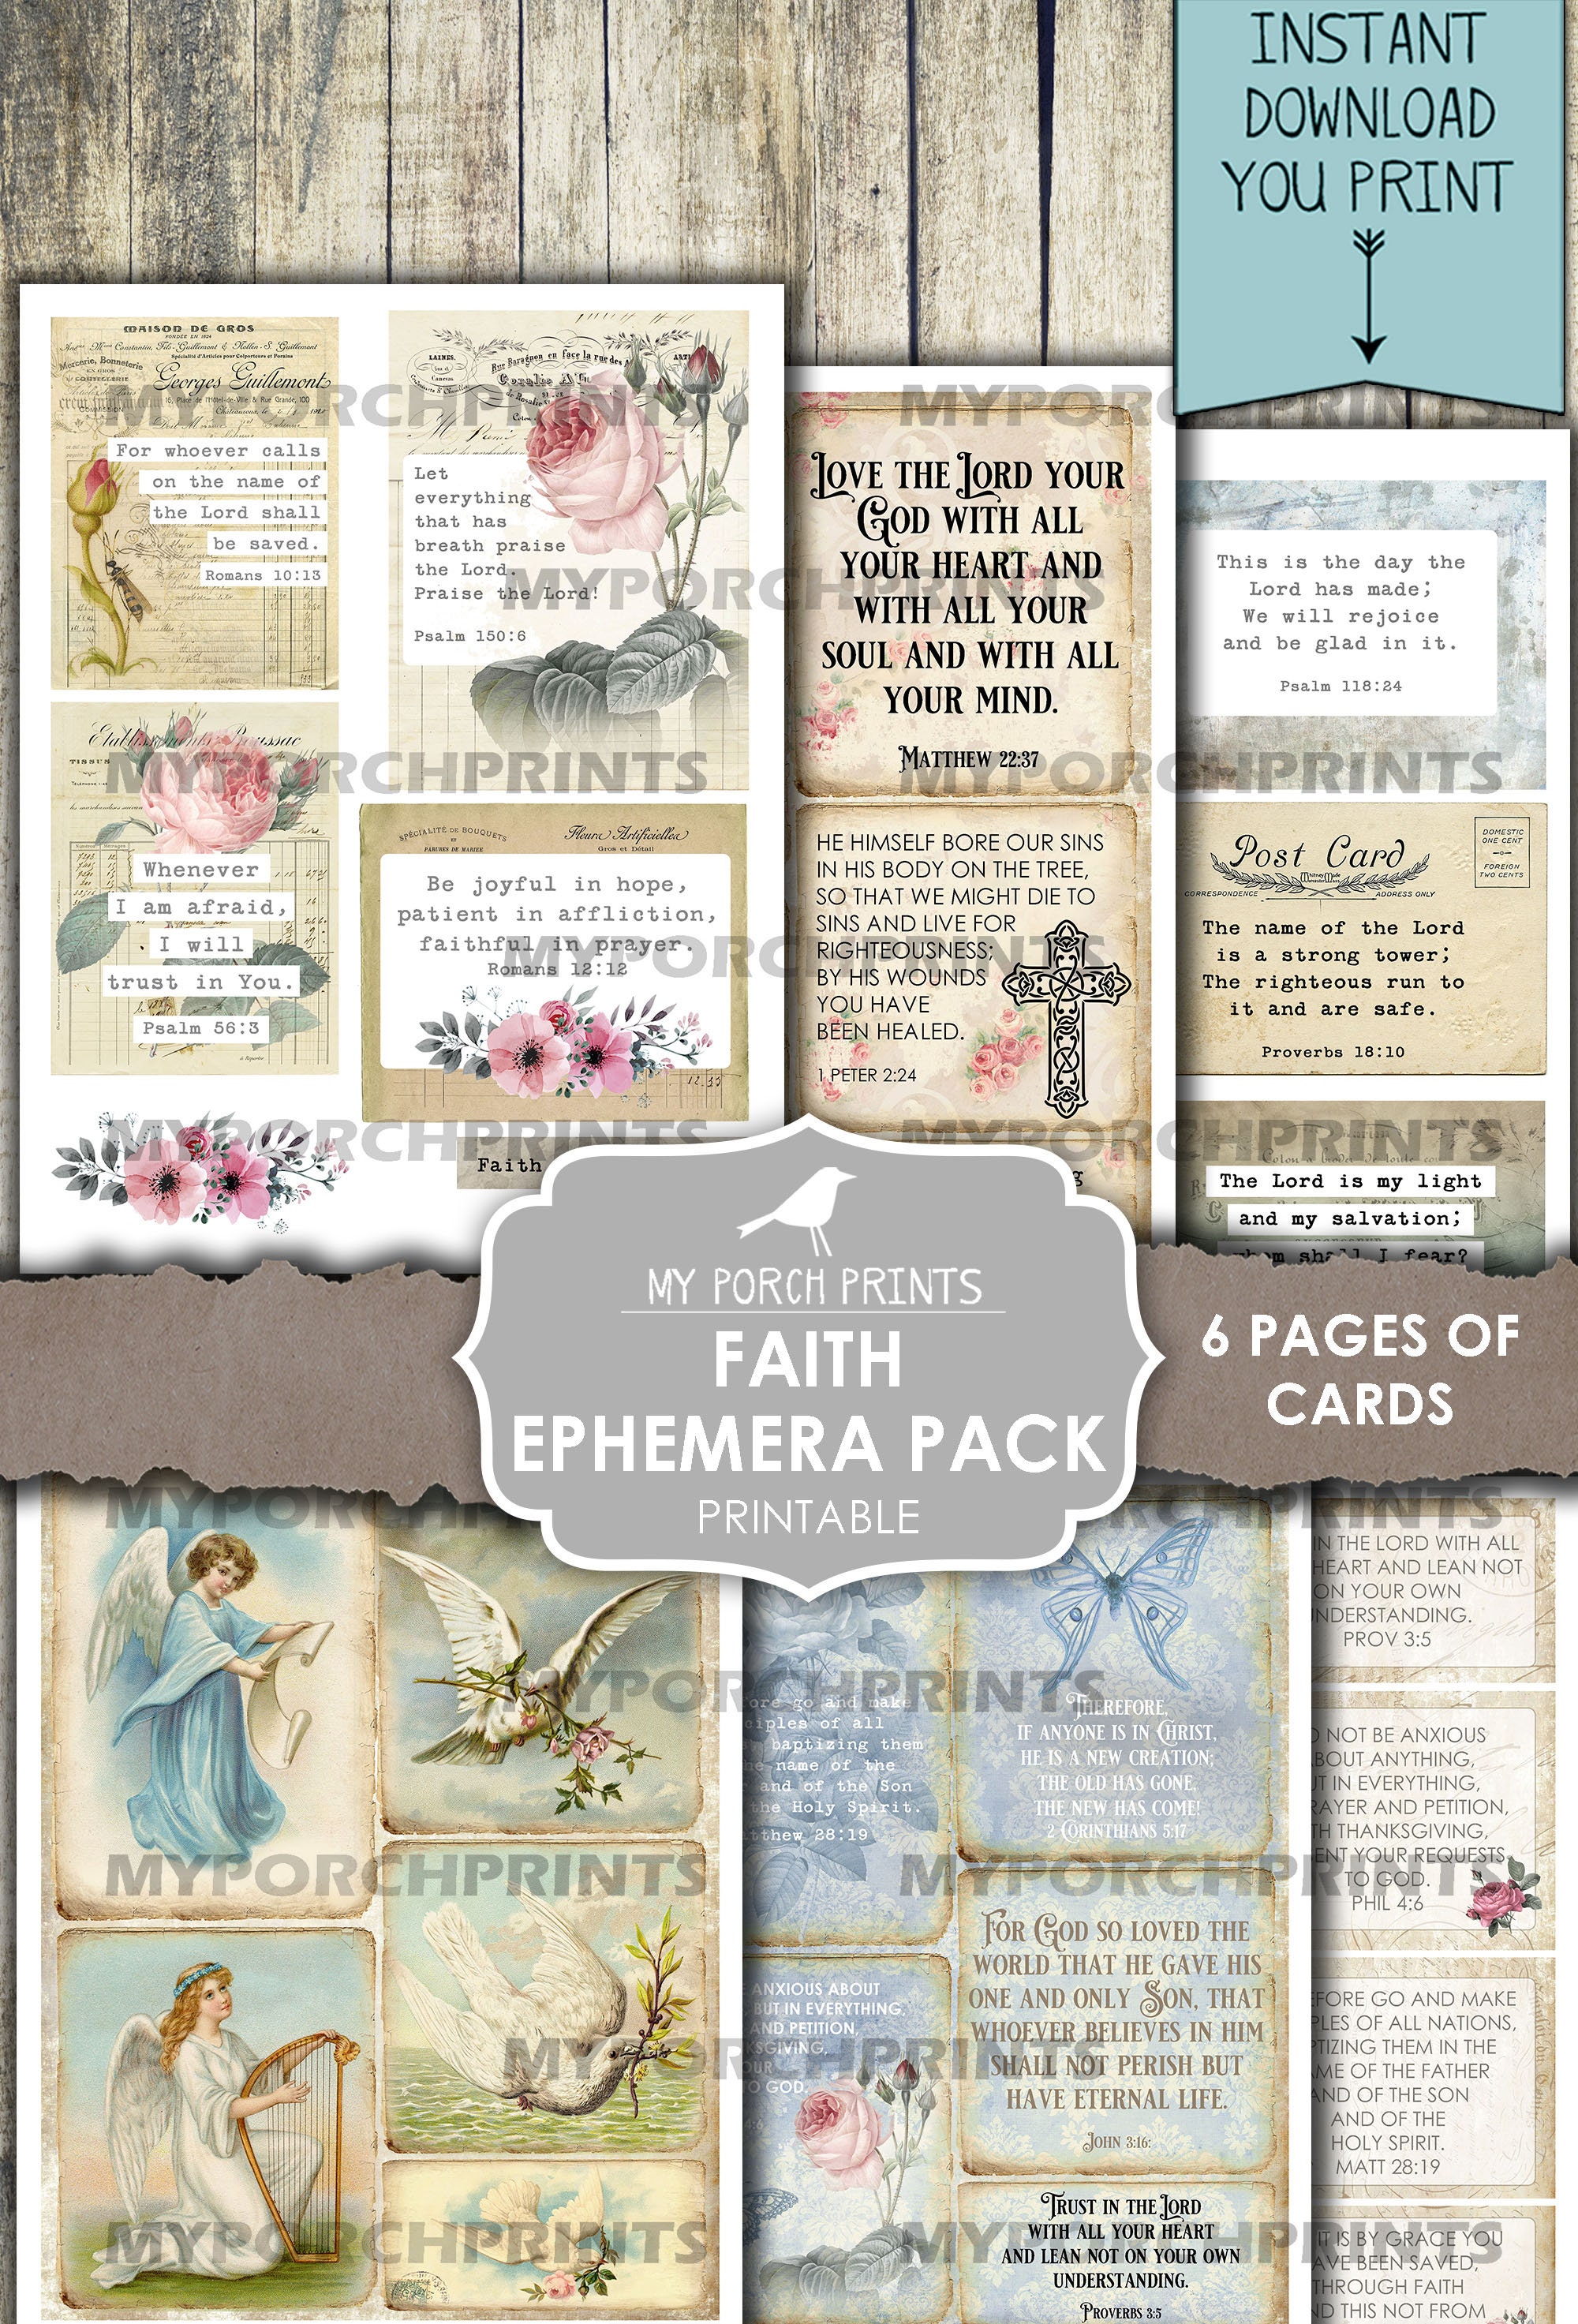 Christian Faith Vintage Junk Journal Pages And Ephemera: Over 210 Catholic  & Bible Scripture Themed Labels, Postcards, Tags, Papers & Ephemera Pieces   Collage And Many Other Paper Crafts: Publishing, Printopedia:  9798445574798